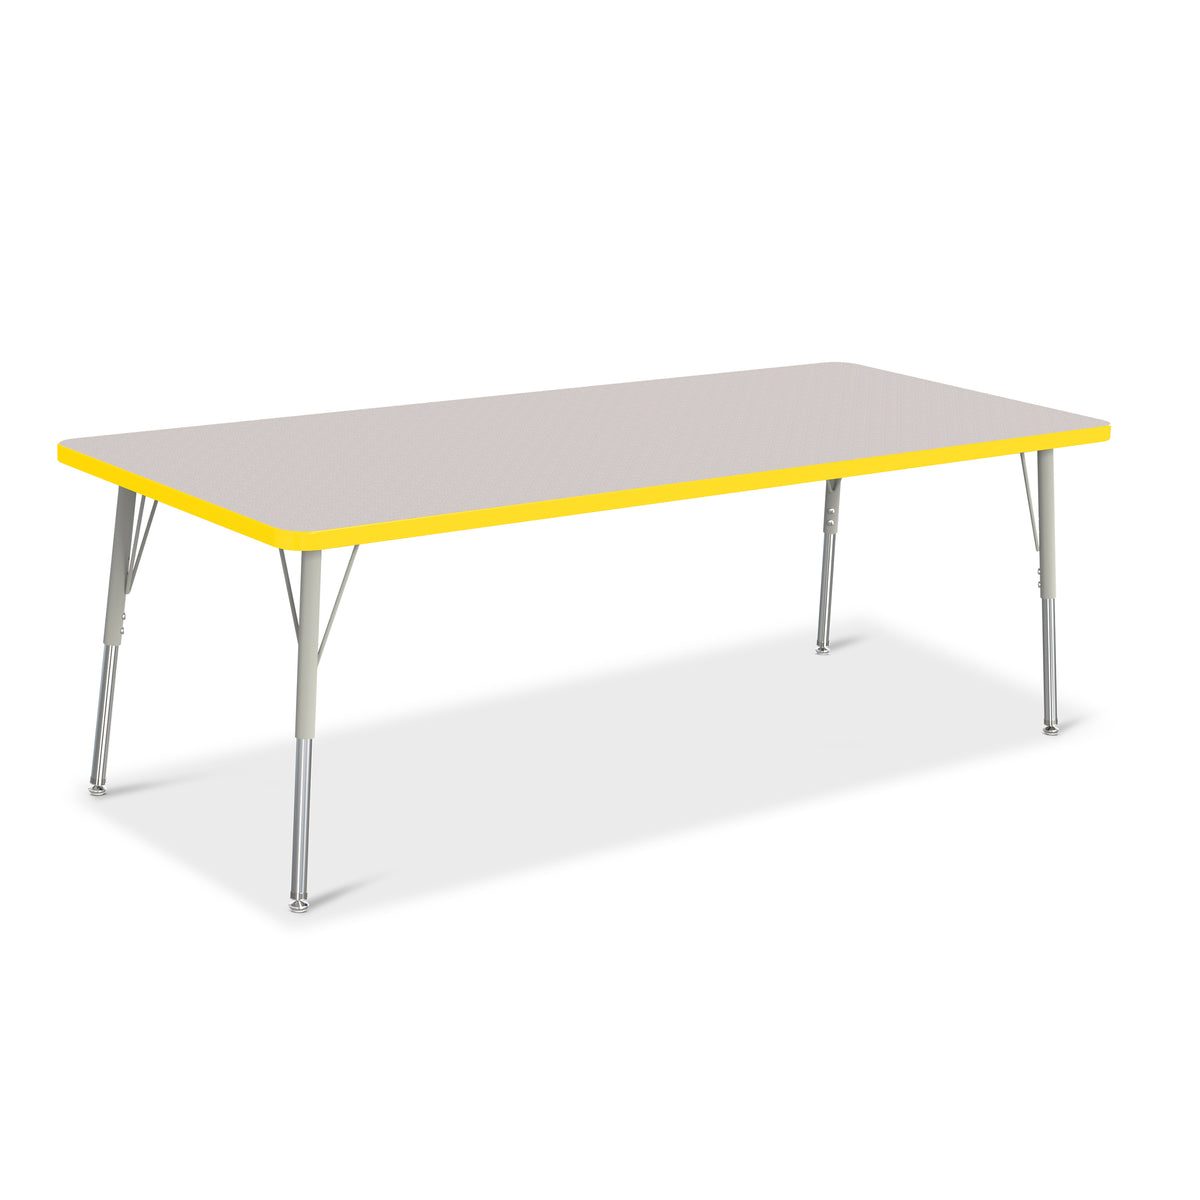 6413JCA007, Berries Rectangle Activity Table - 30" X 72", A-height - Freckled Gray/Yellow/Gray